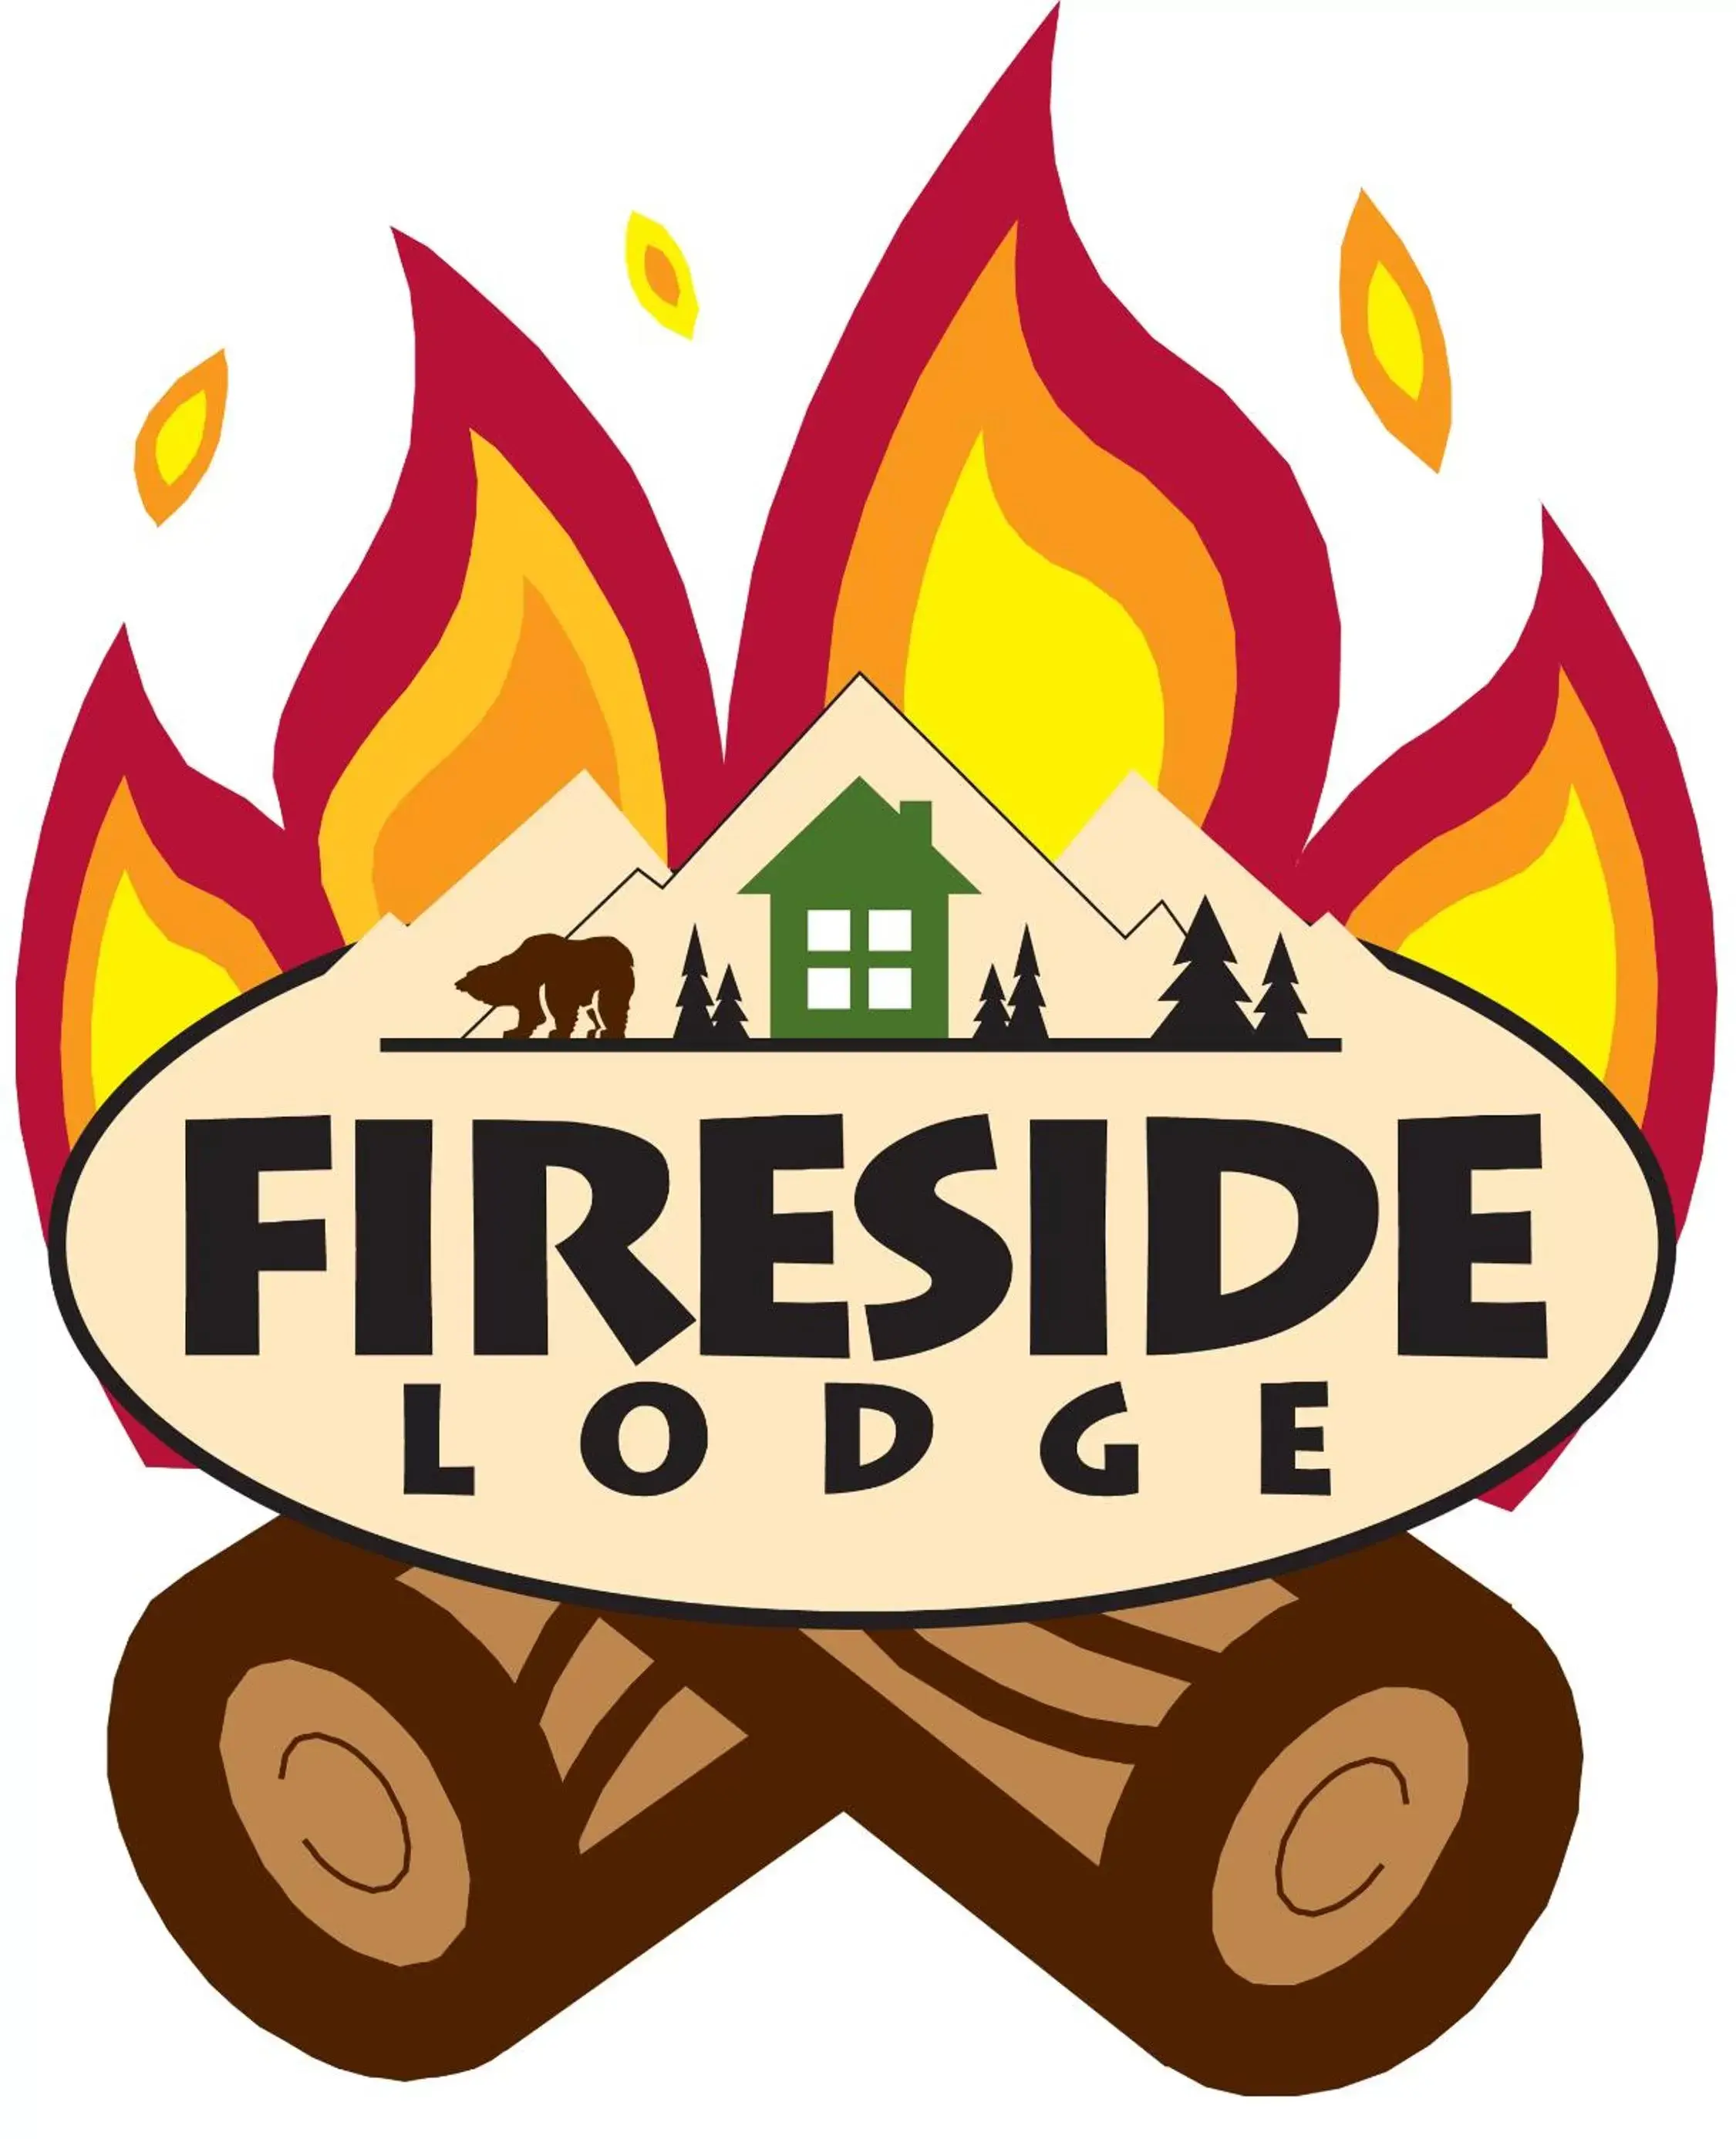 Property logo or sign in Fireside Lodge